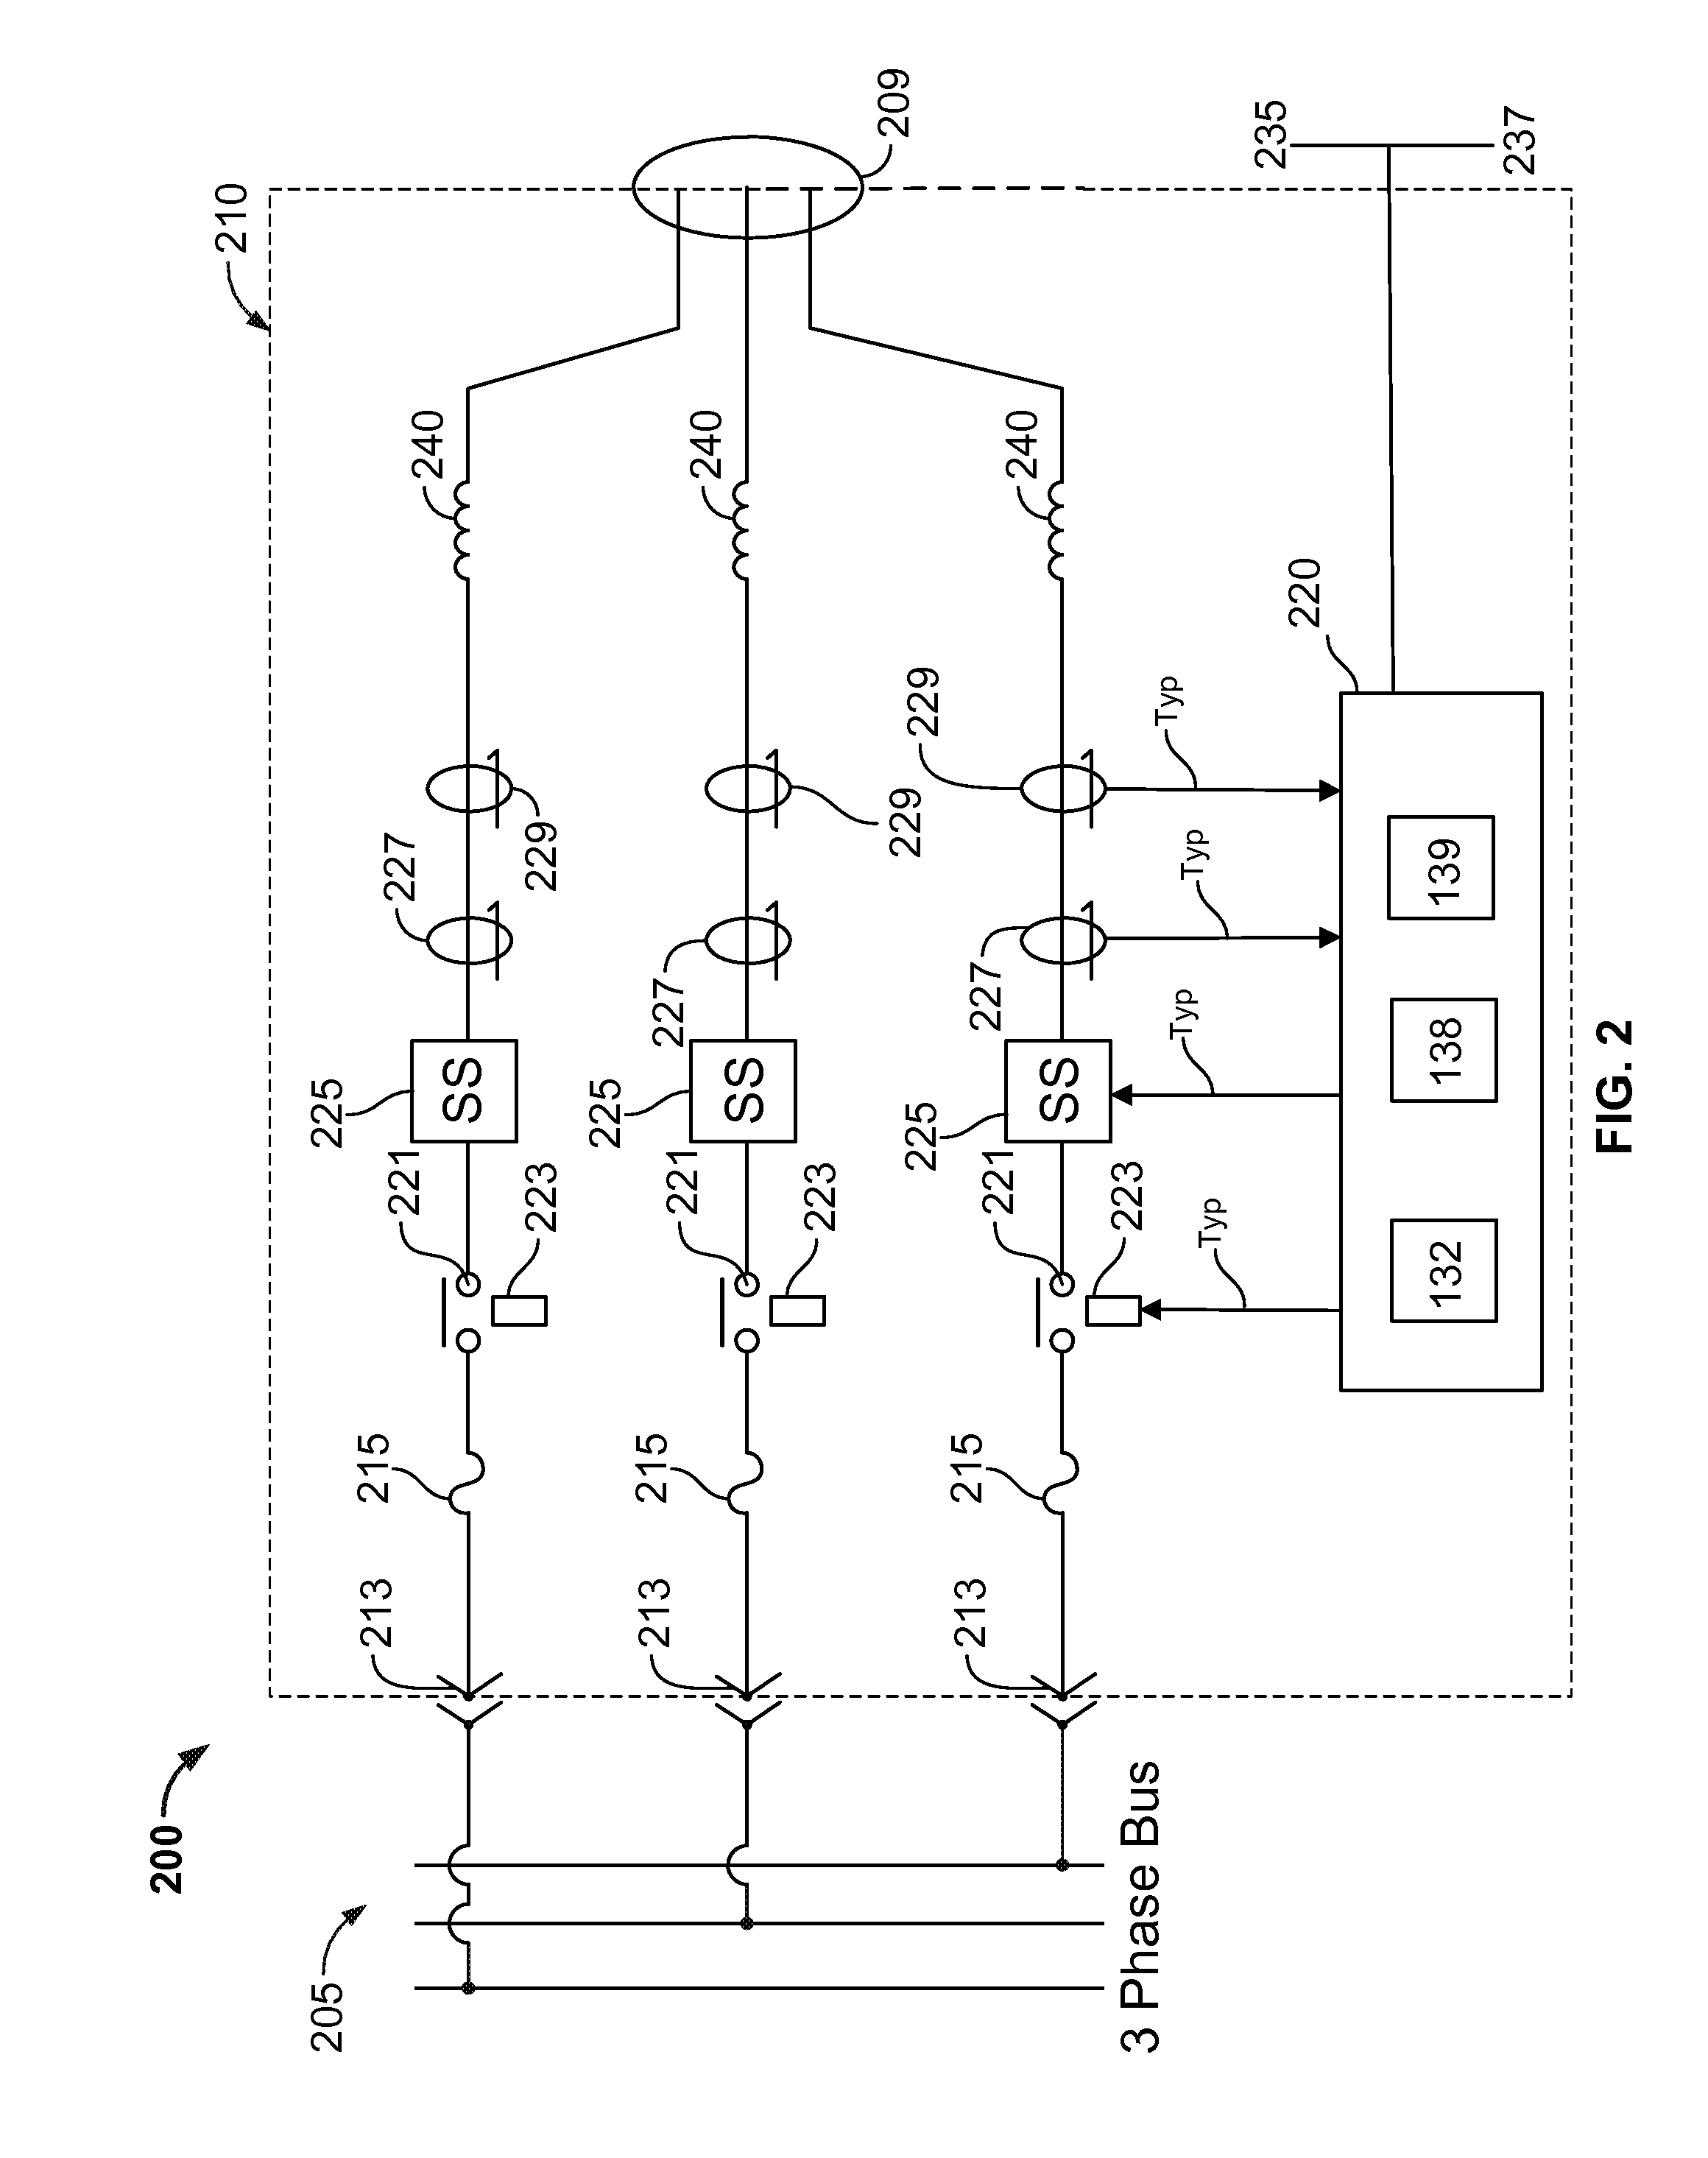 Electrical circuit protector